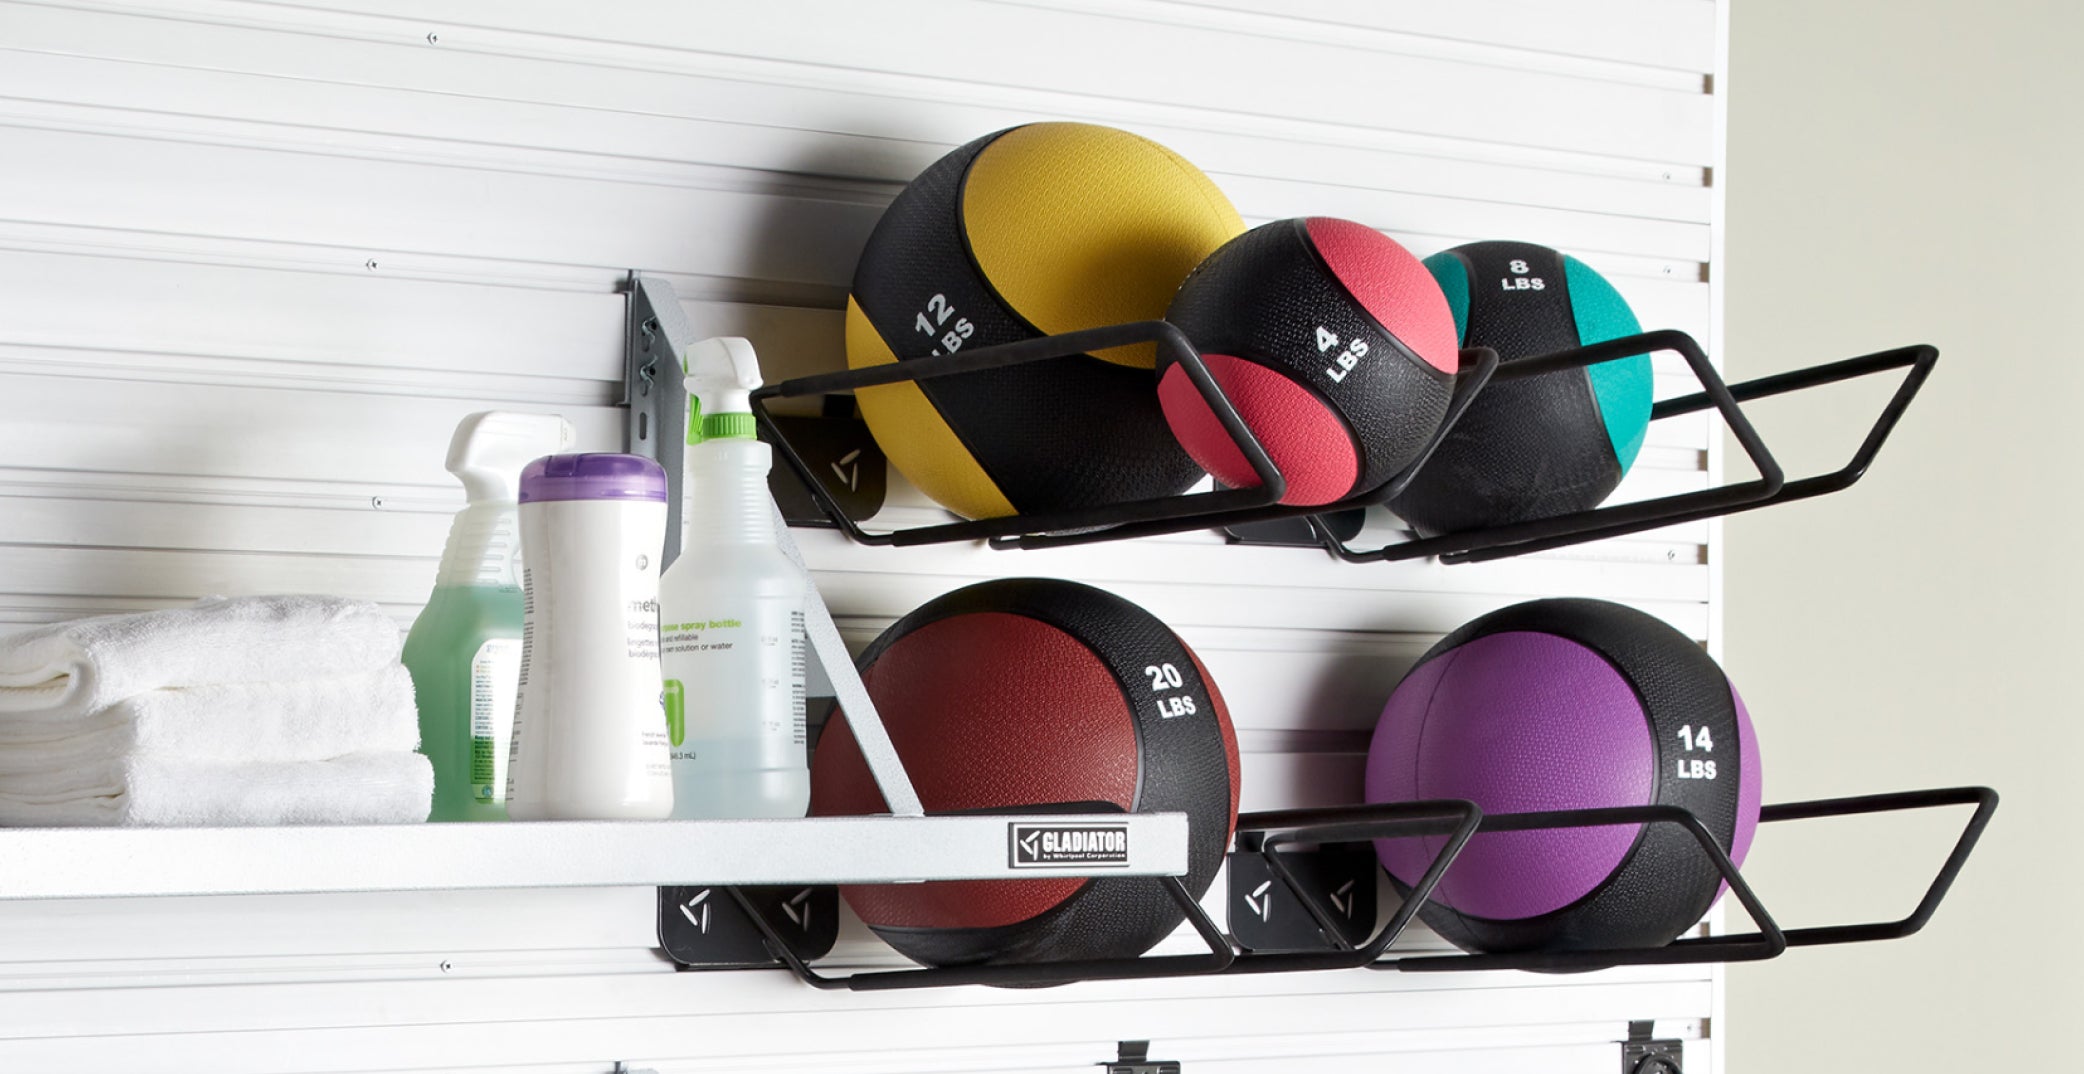 A Gladiator brand shelf organizing unit, complete with workout balls and gym equipment cleaning materials.